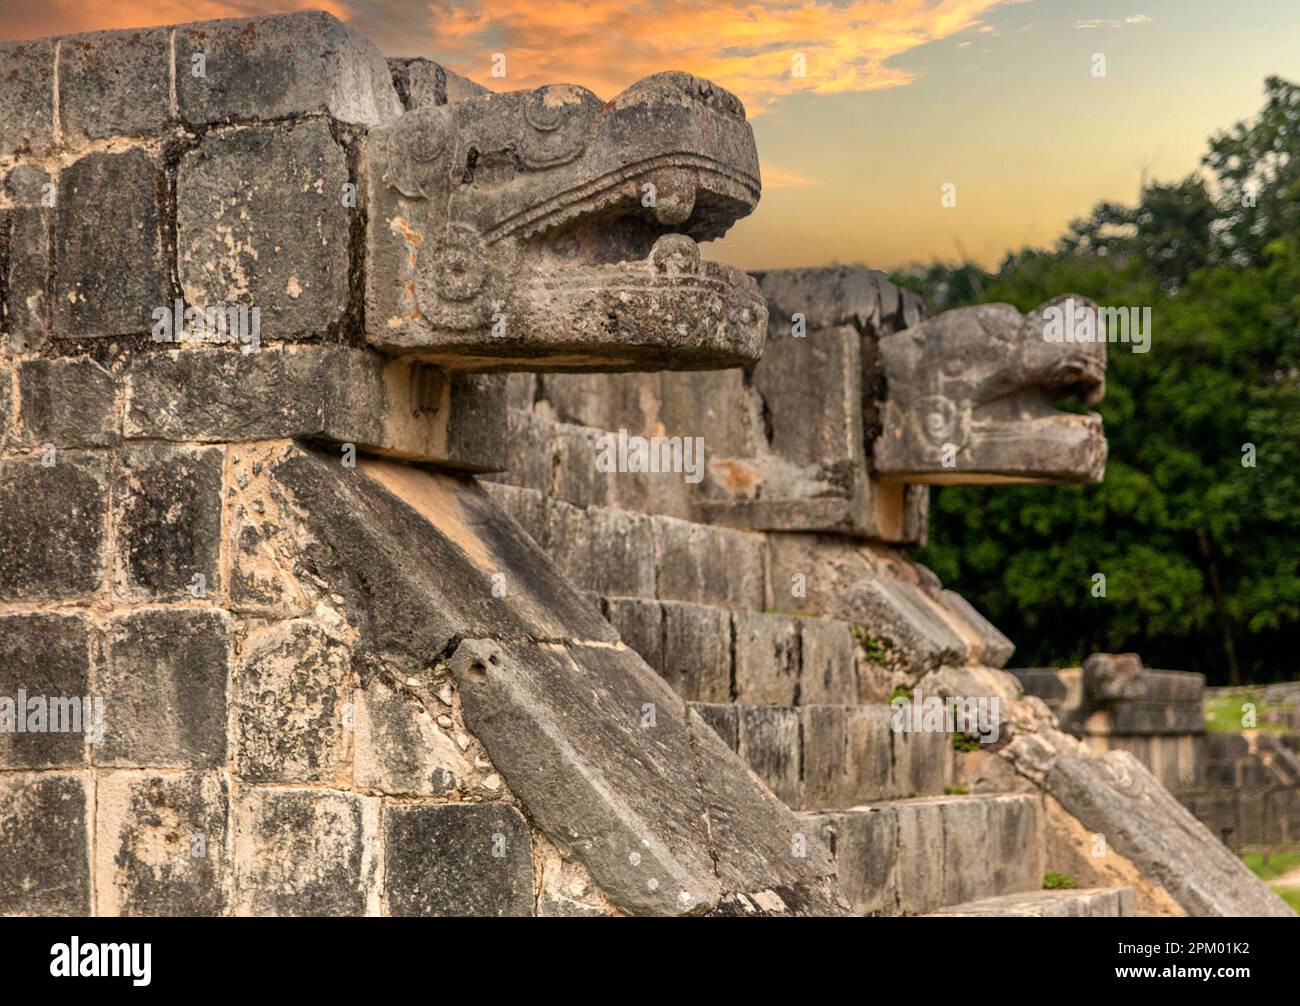 Enjoying the God Kukulkan on the platform of eagles and jaguars under a beautiful orange sunset, this is the feathered serpent of the Mayan civilizati Stock Photo